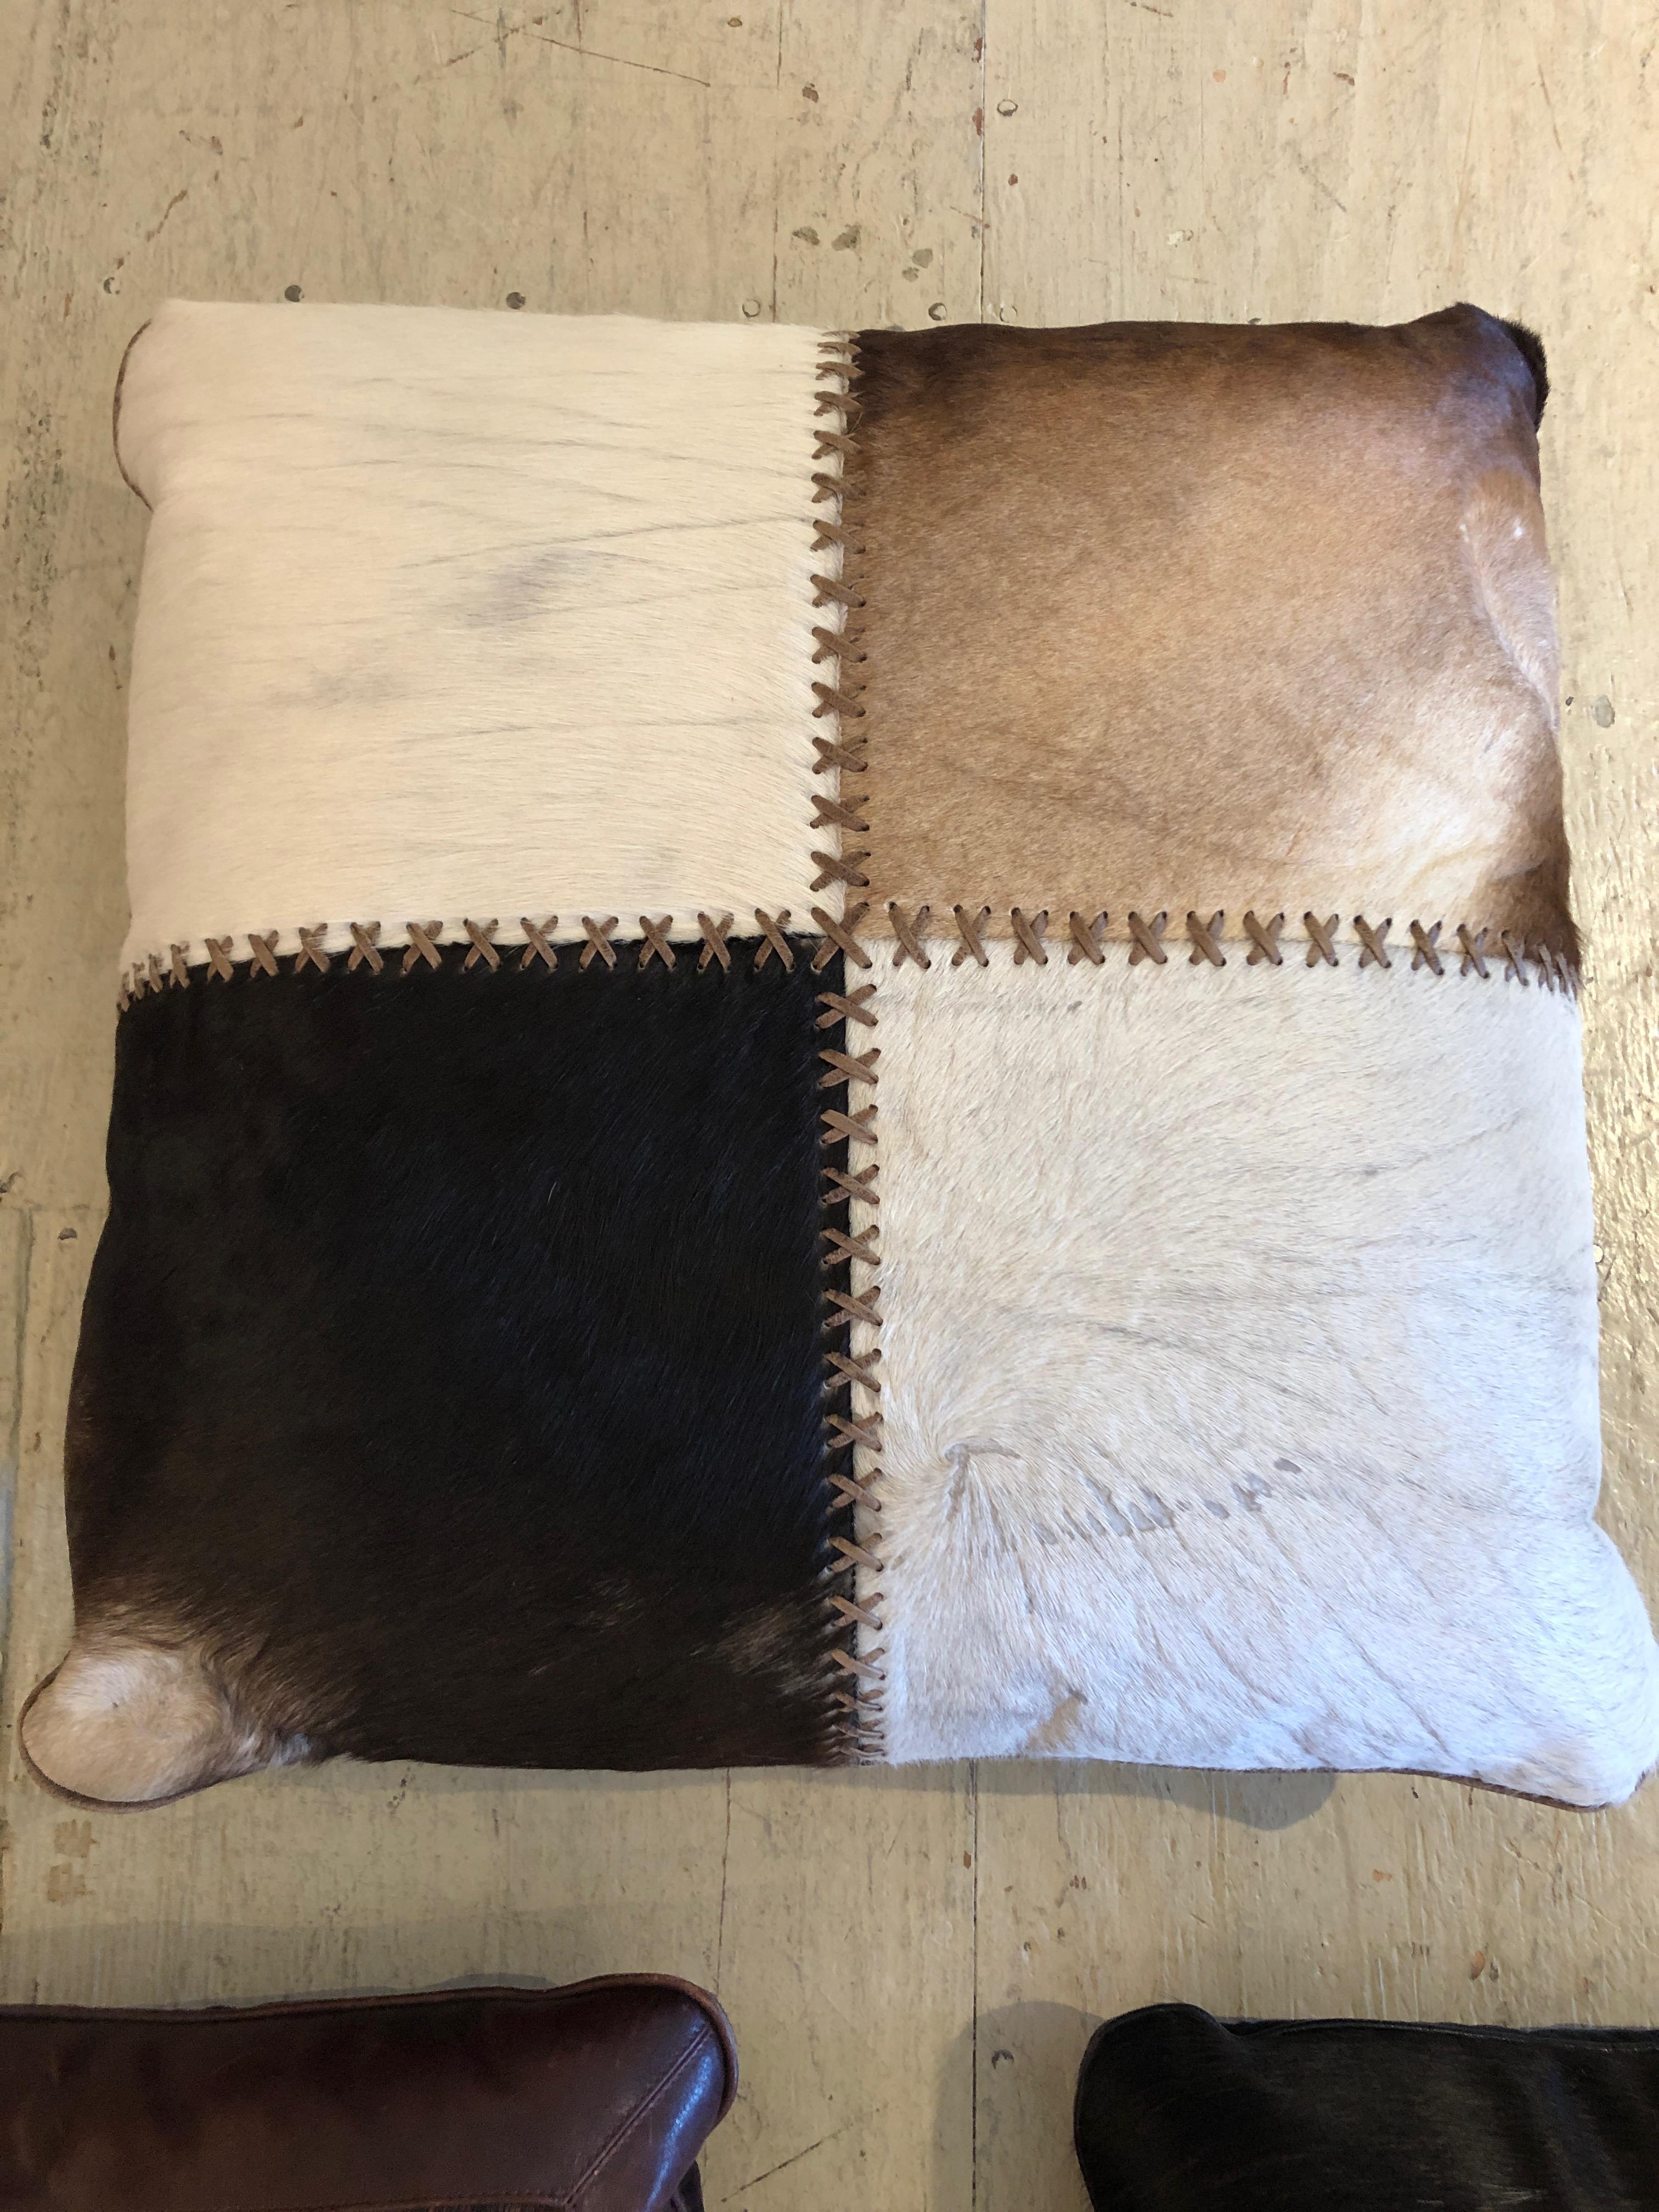 Three very handsome handmade custom pillows having an assortment of cowhide, leather and decorative stitching in warm browns, cream, black and metallic leather. Two small pillows are 16 x 16 x 3.5.